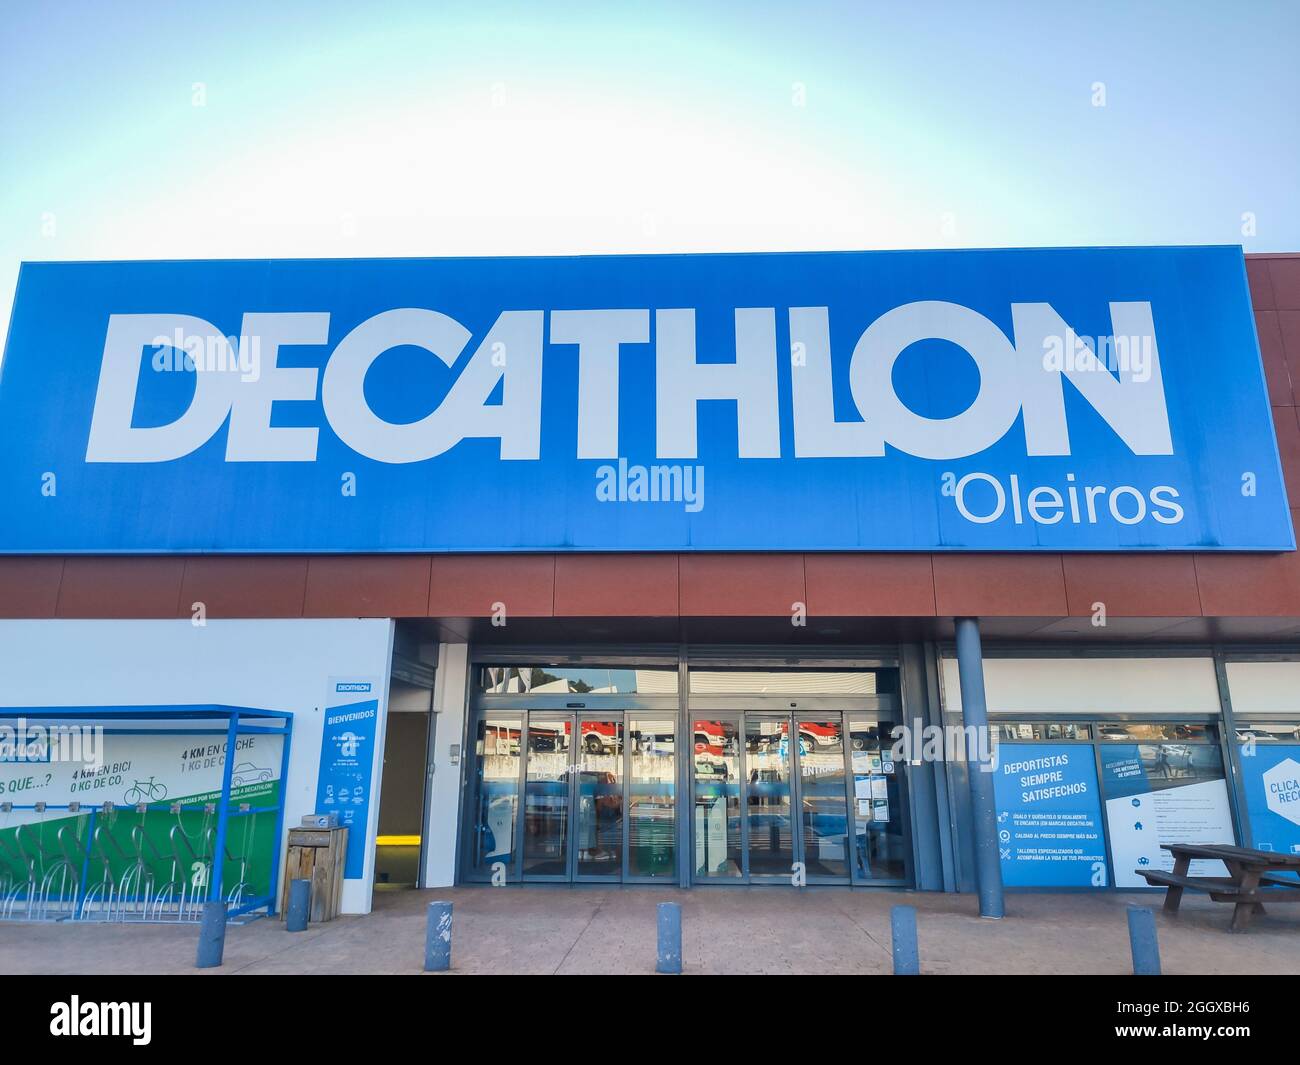 Decathlon Group High Resolution Stock Photography and Images - Alamy